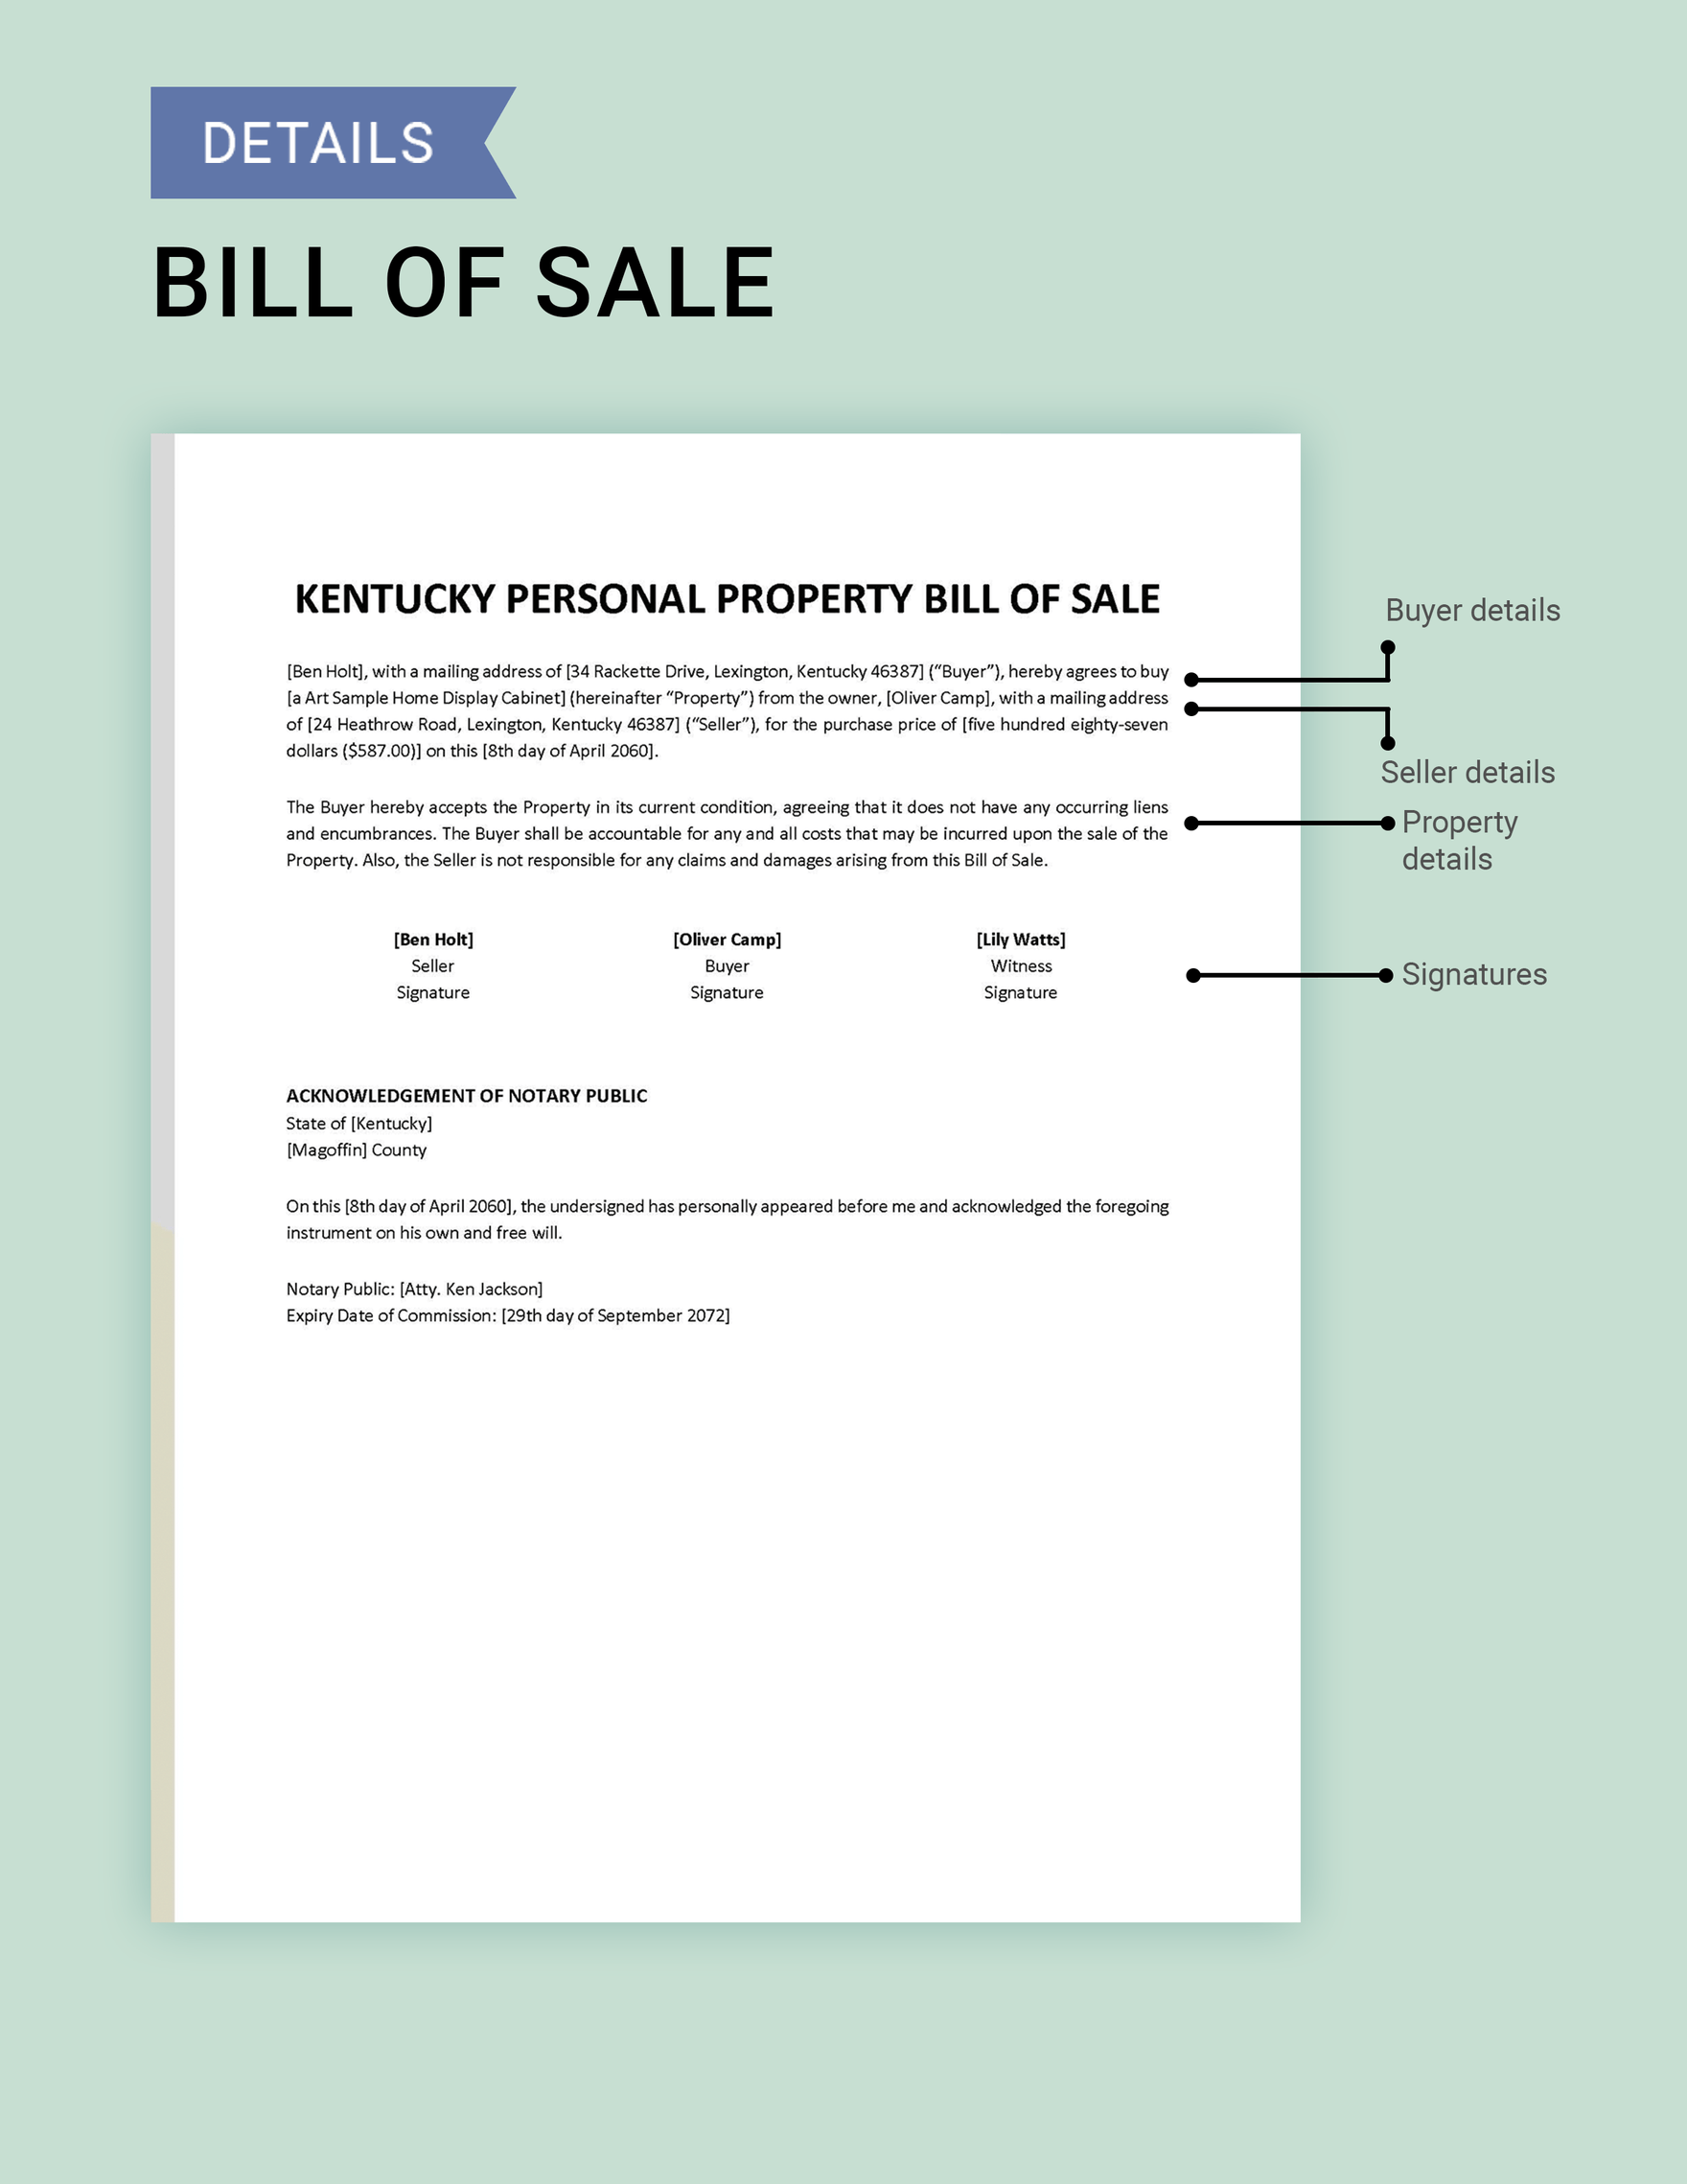 Kentucky Personal Property Bill of Sale Template